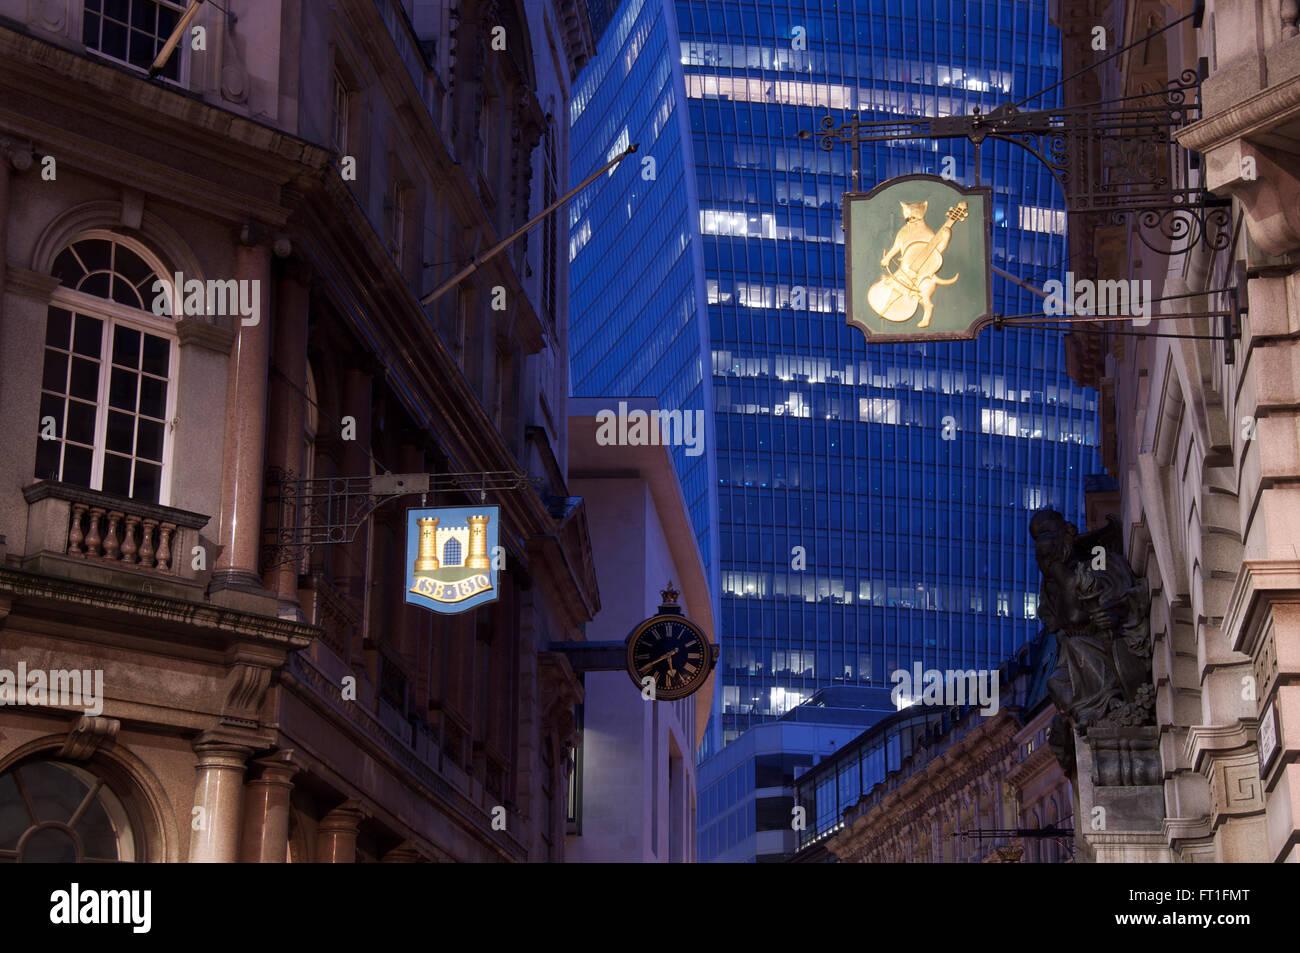 Old buildings and traditional commercial signs alongside modern architecture in historic Lombard Street. The City of London, England, United Kingdom. Stock Photo